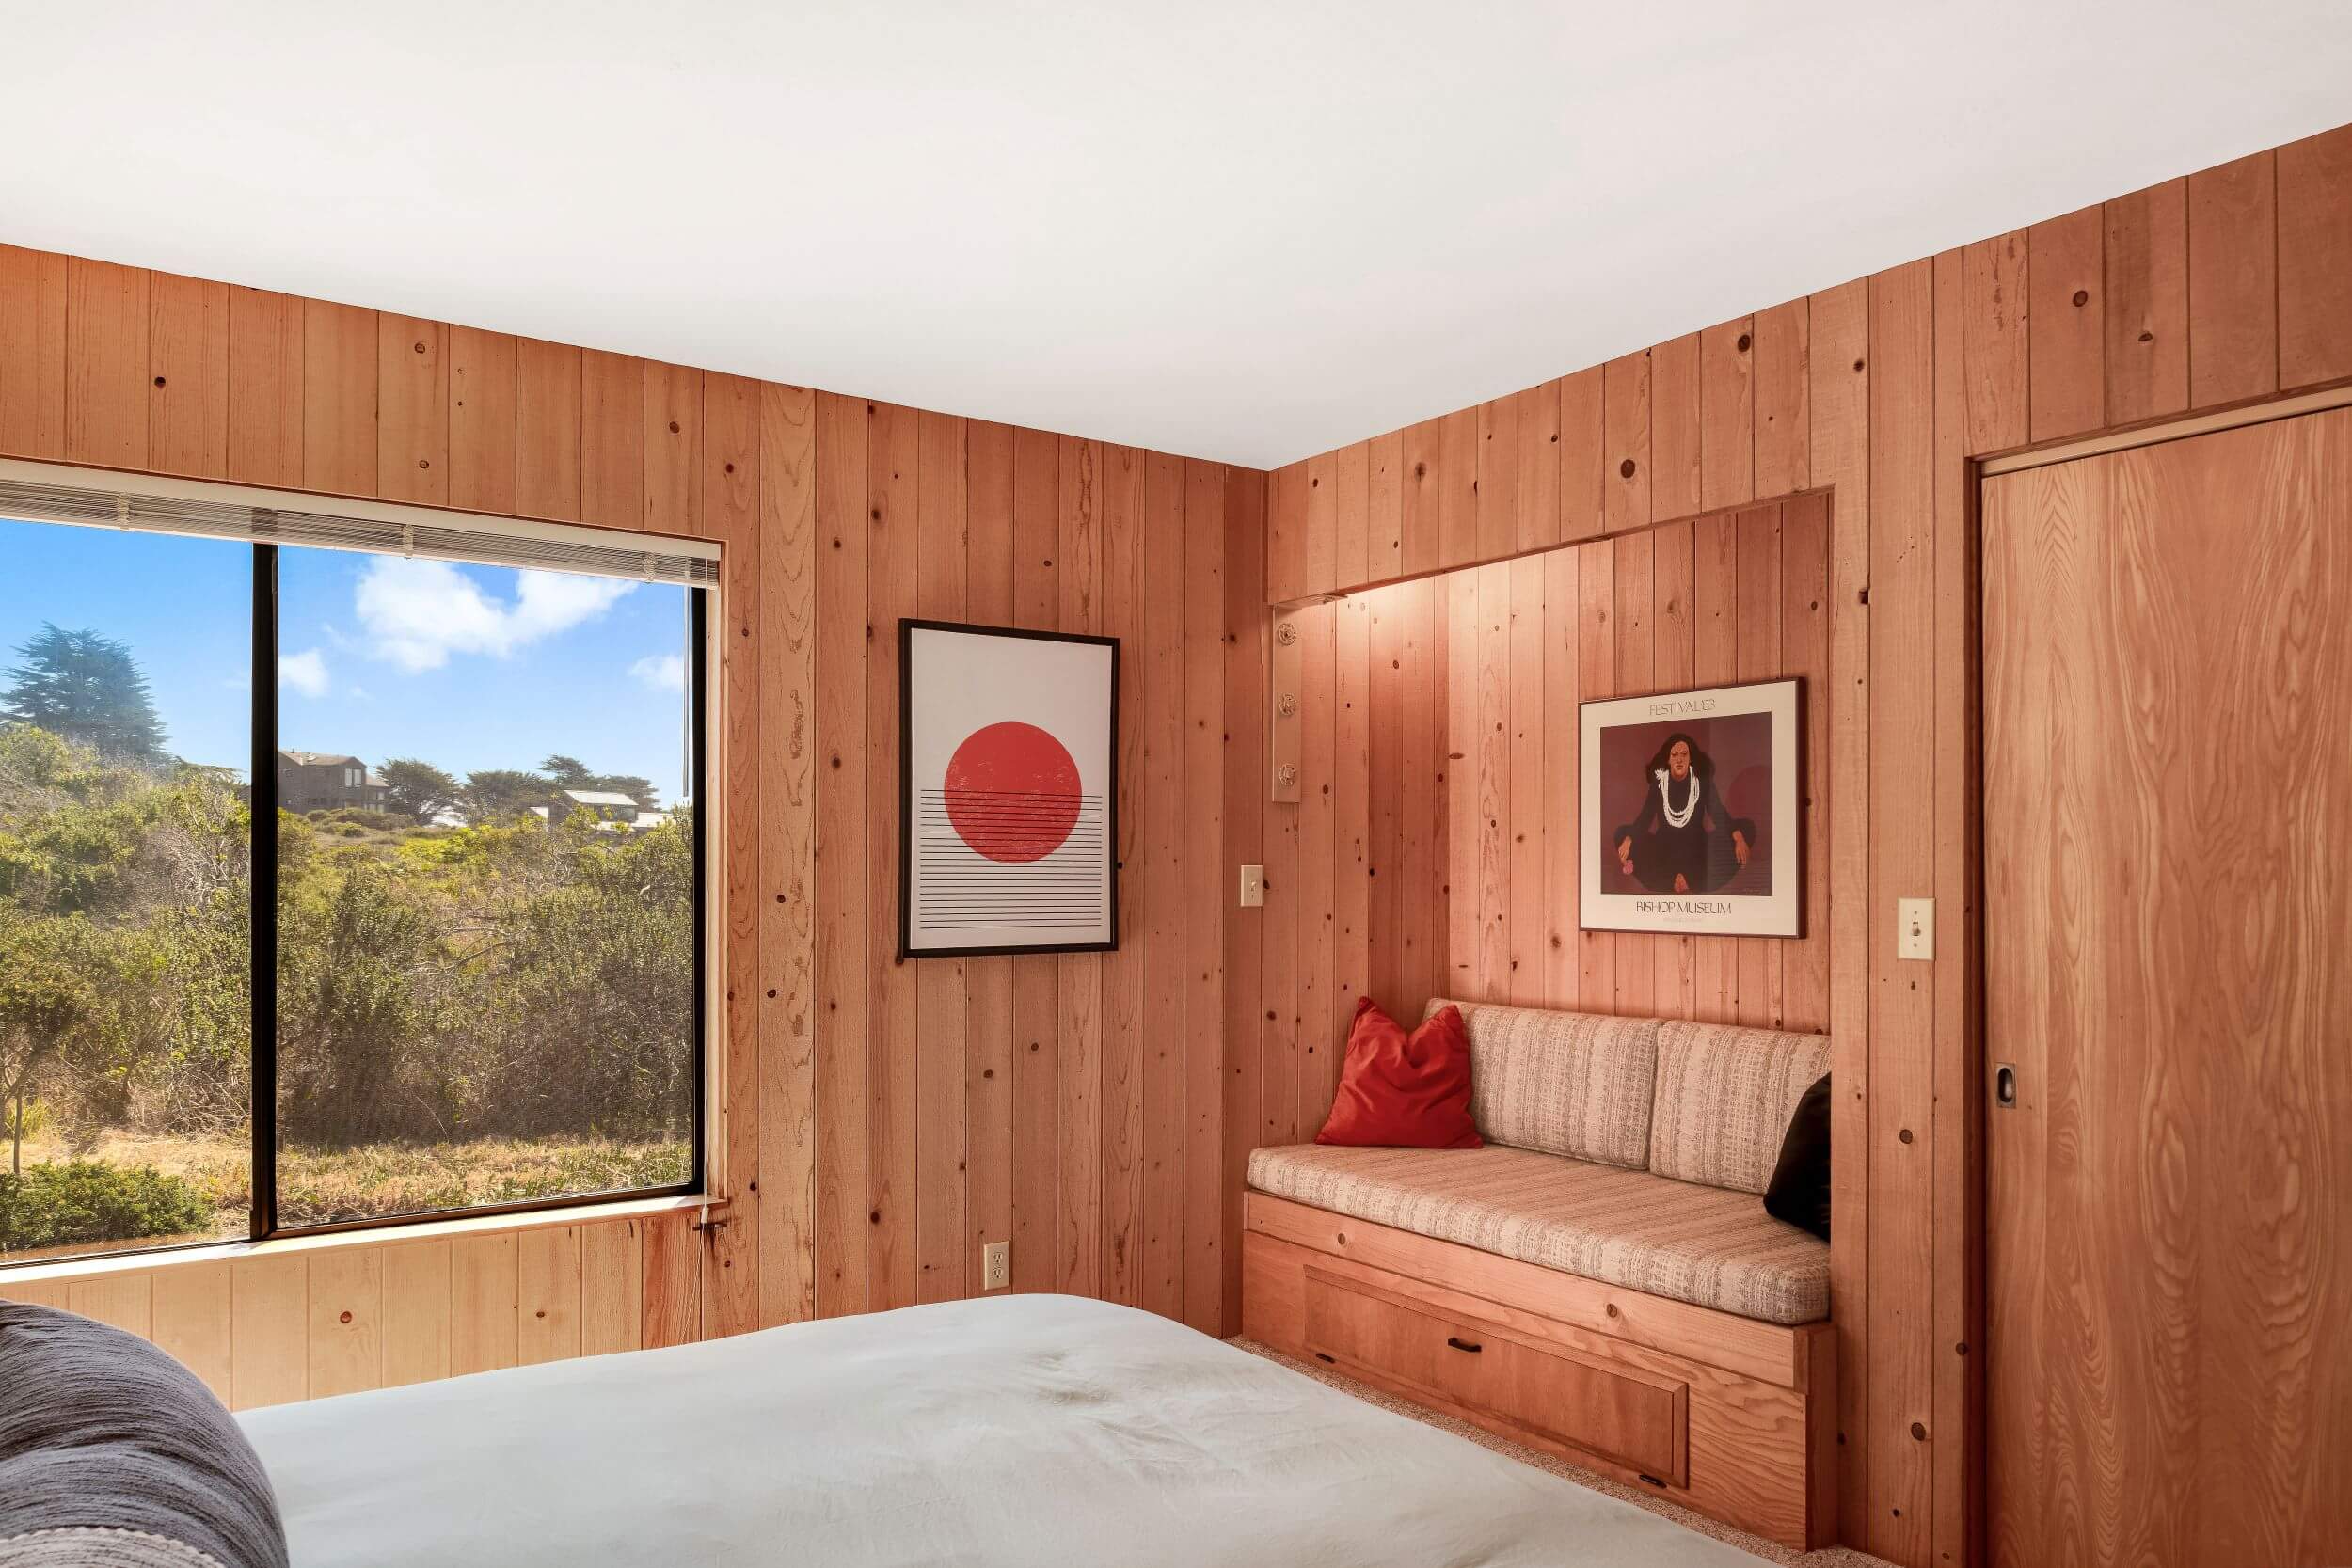 Sea Meadow: 1st large bright bedroom with wood walls, recessed seating and large window looking onto meadow.